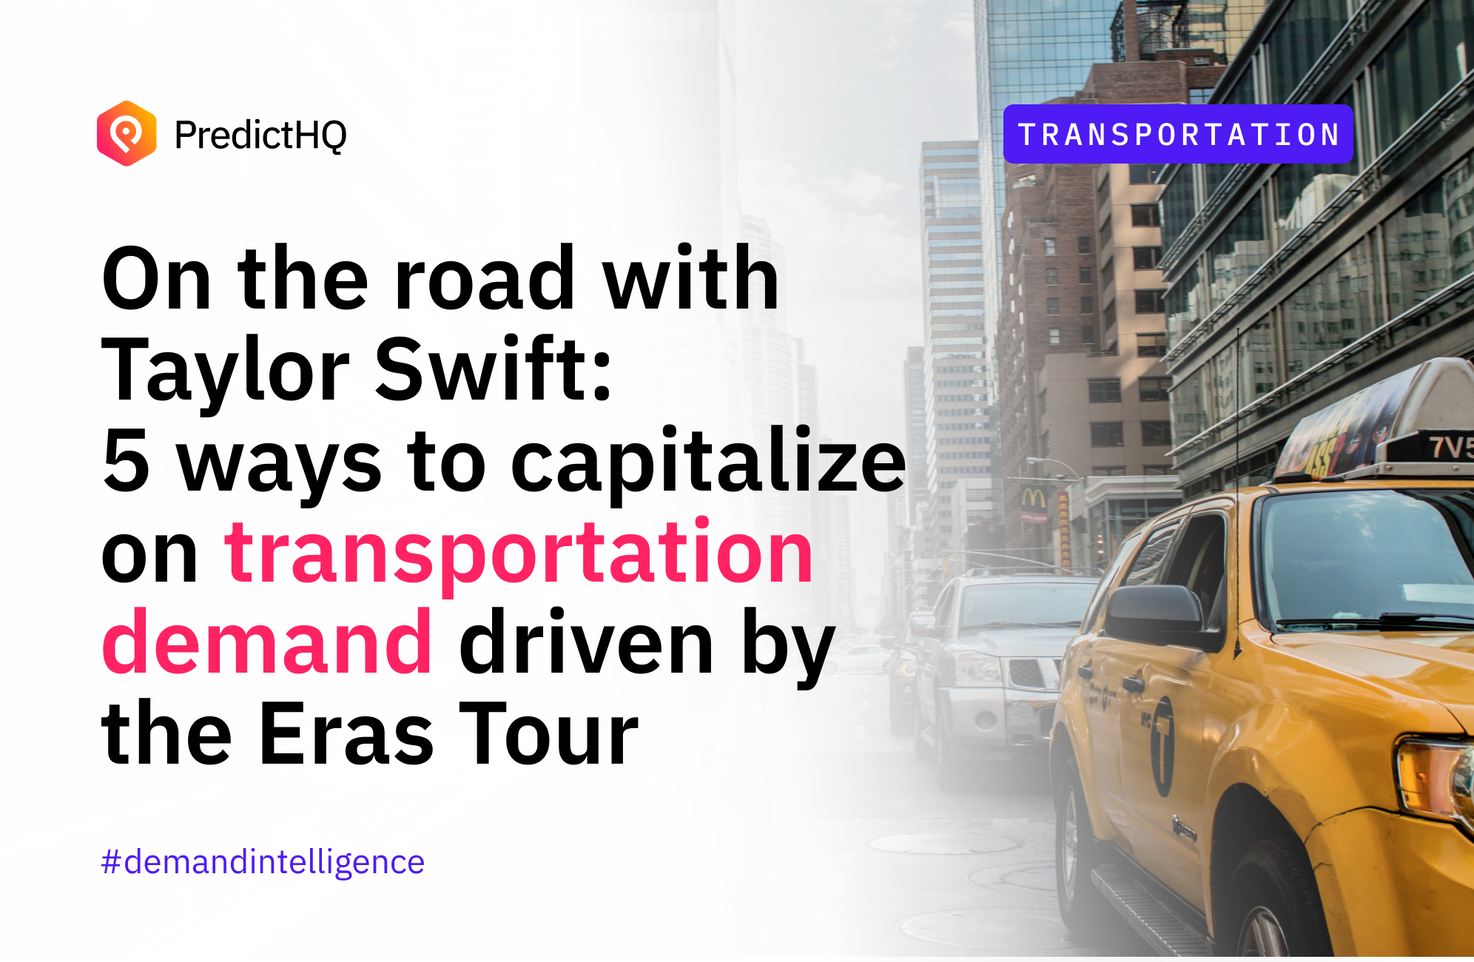 5 ways for QSRs to prepare for Taylor Swift's Eras Tour - PredictHQ